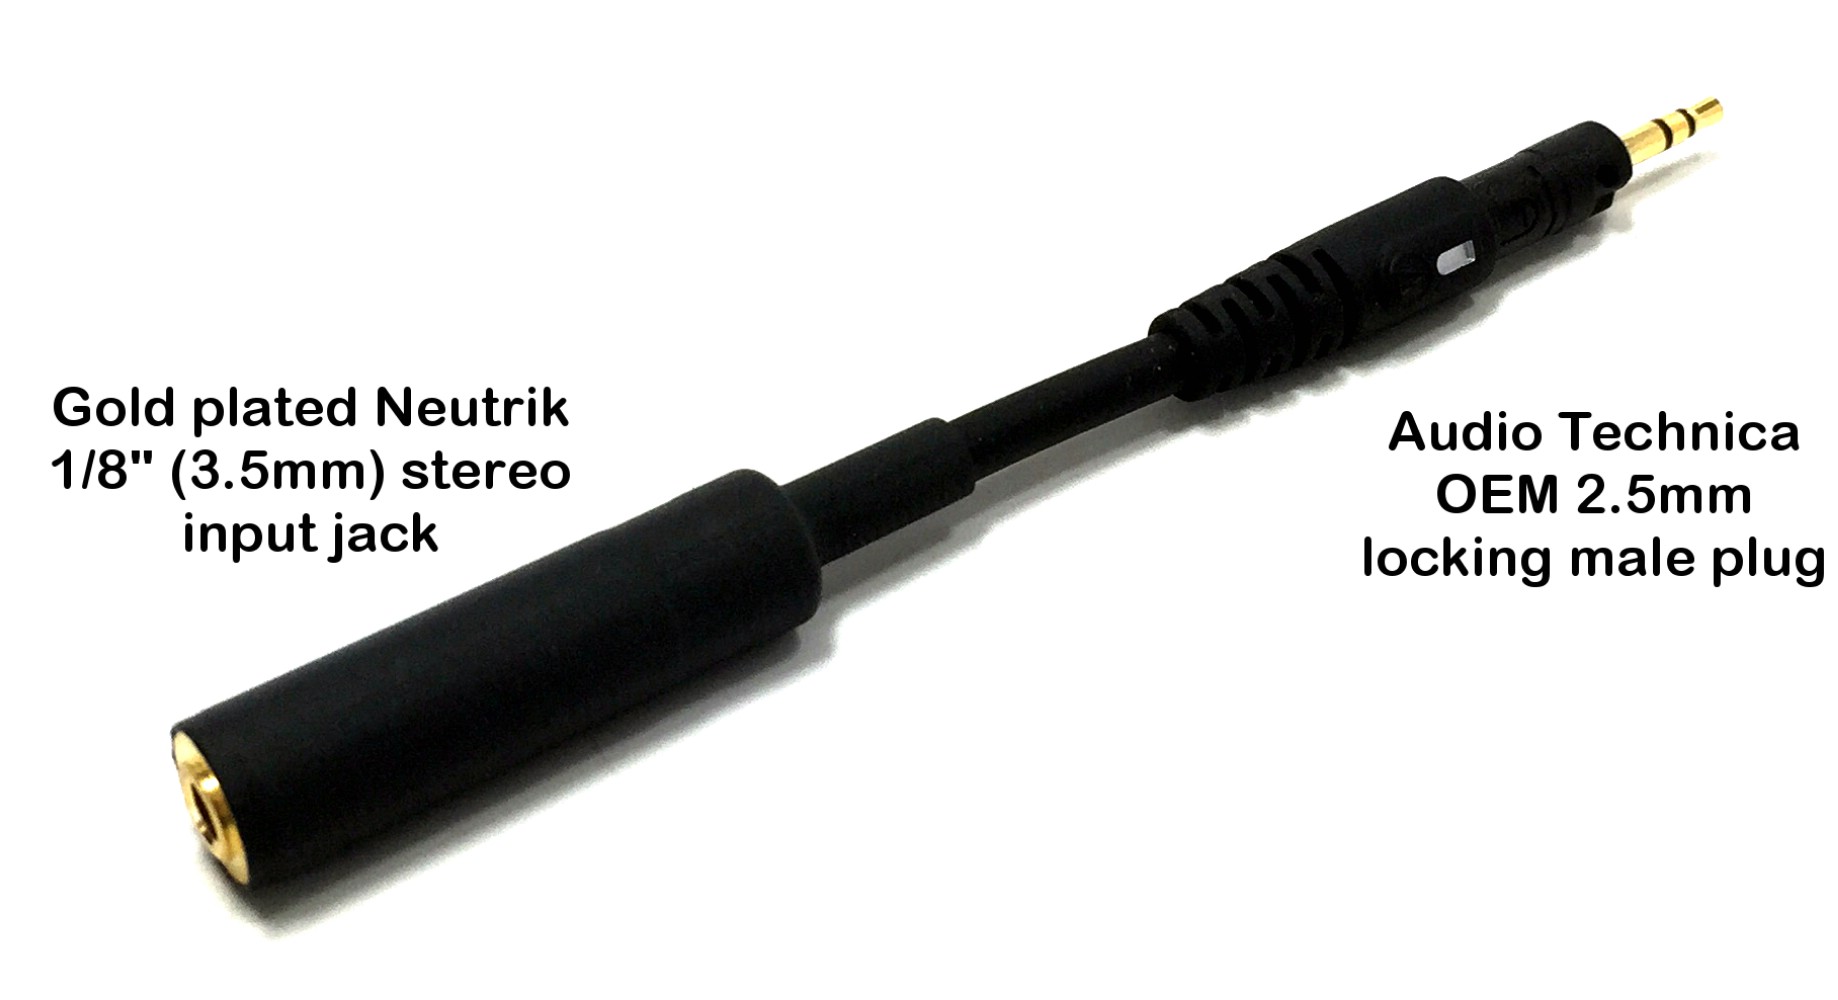 Sound Professionals Use this adapter to connect standard 3.5mm (1/8") cables to your ATH-M50x headphones - Original factory made Audio Technica lo